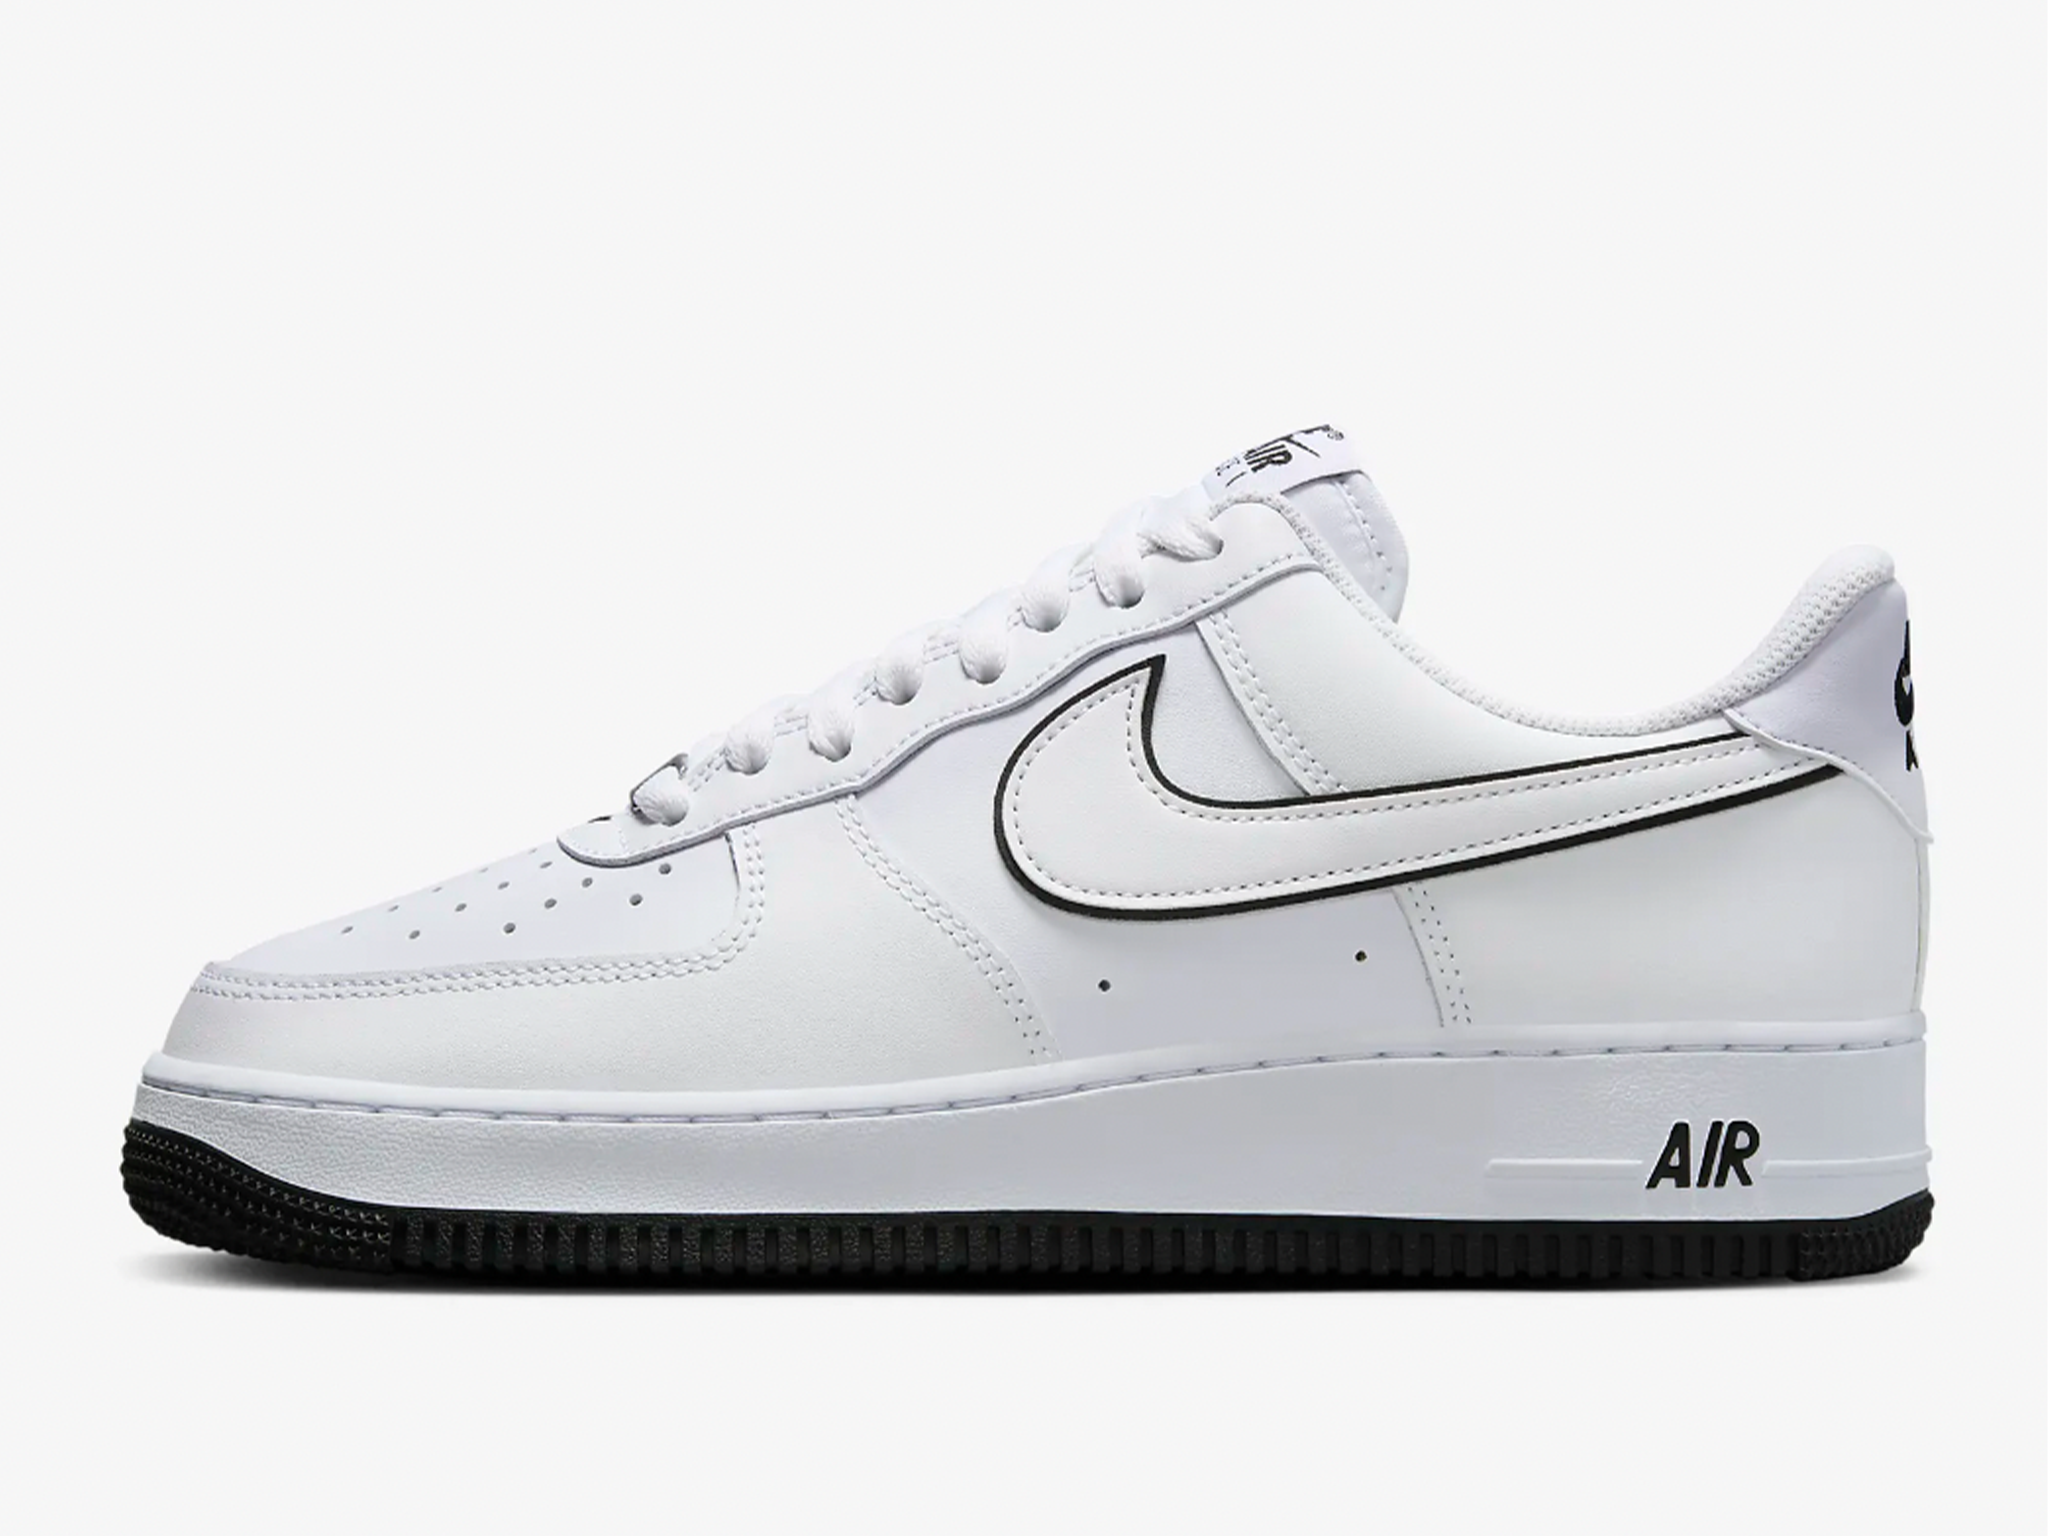 indybest, black friday, nike, black friday, the nike cyber monday sale is here, with deals on air force 1s, tech fleeces, jordans and more